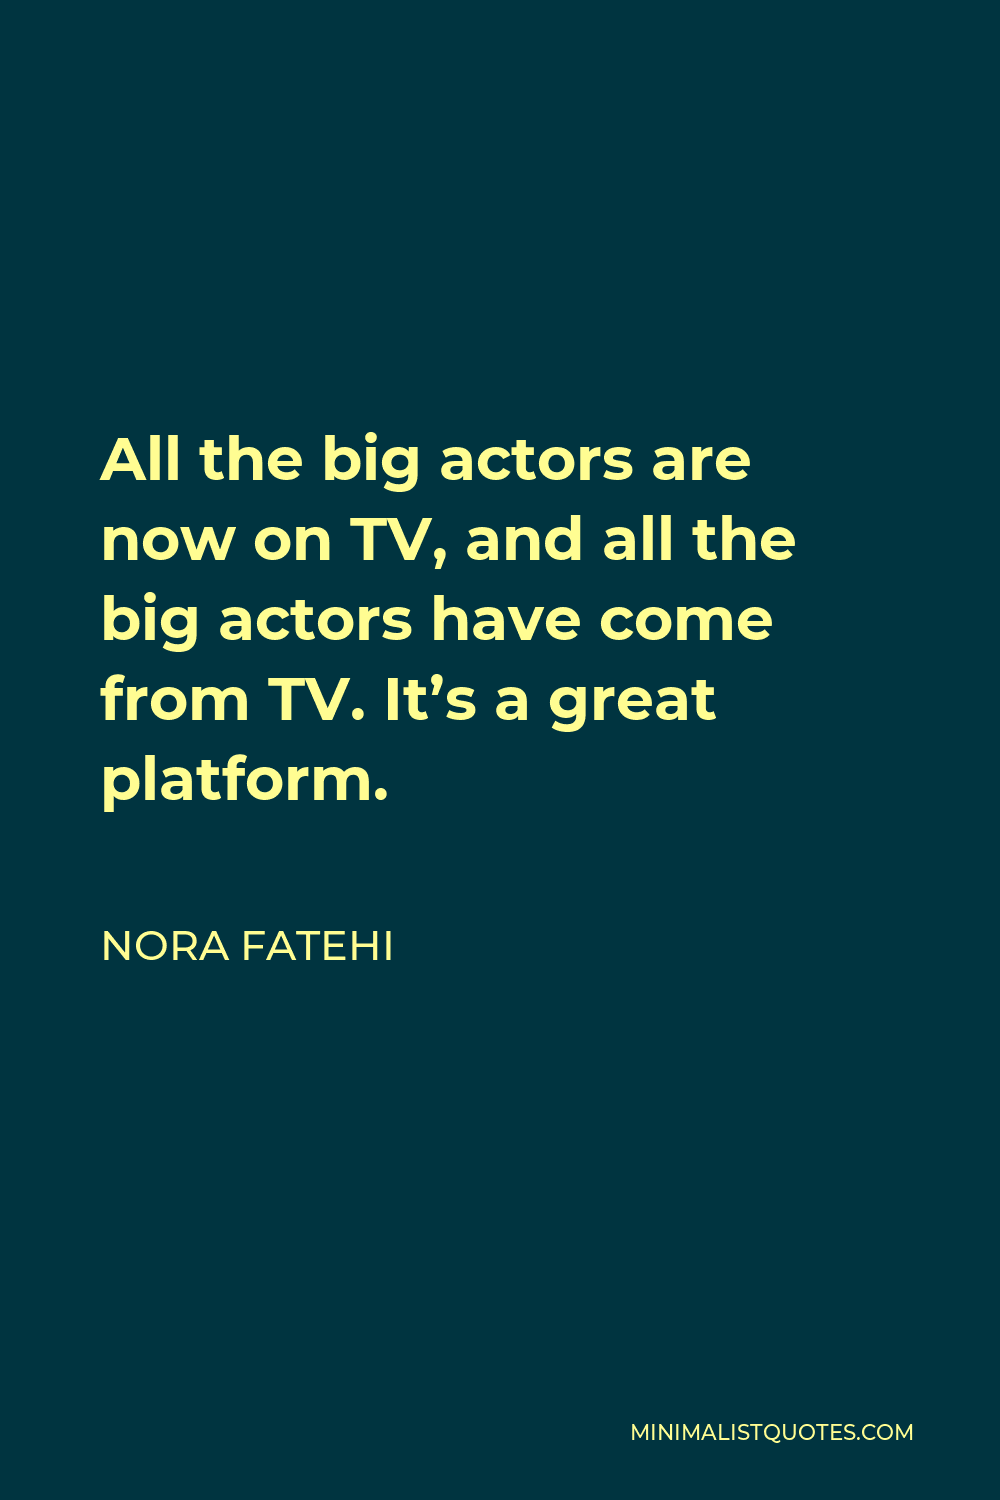 Nora Fatehi Quote - All the big actors are now on TV, and all the big actors have come from TV. It’s a great platform.